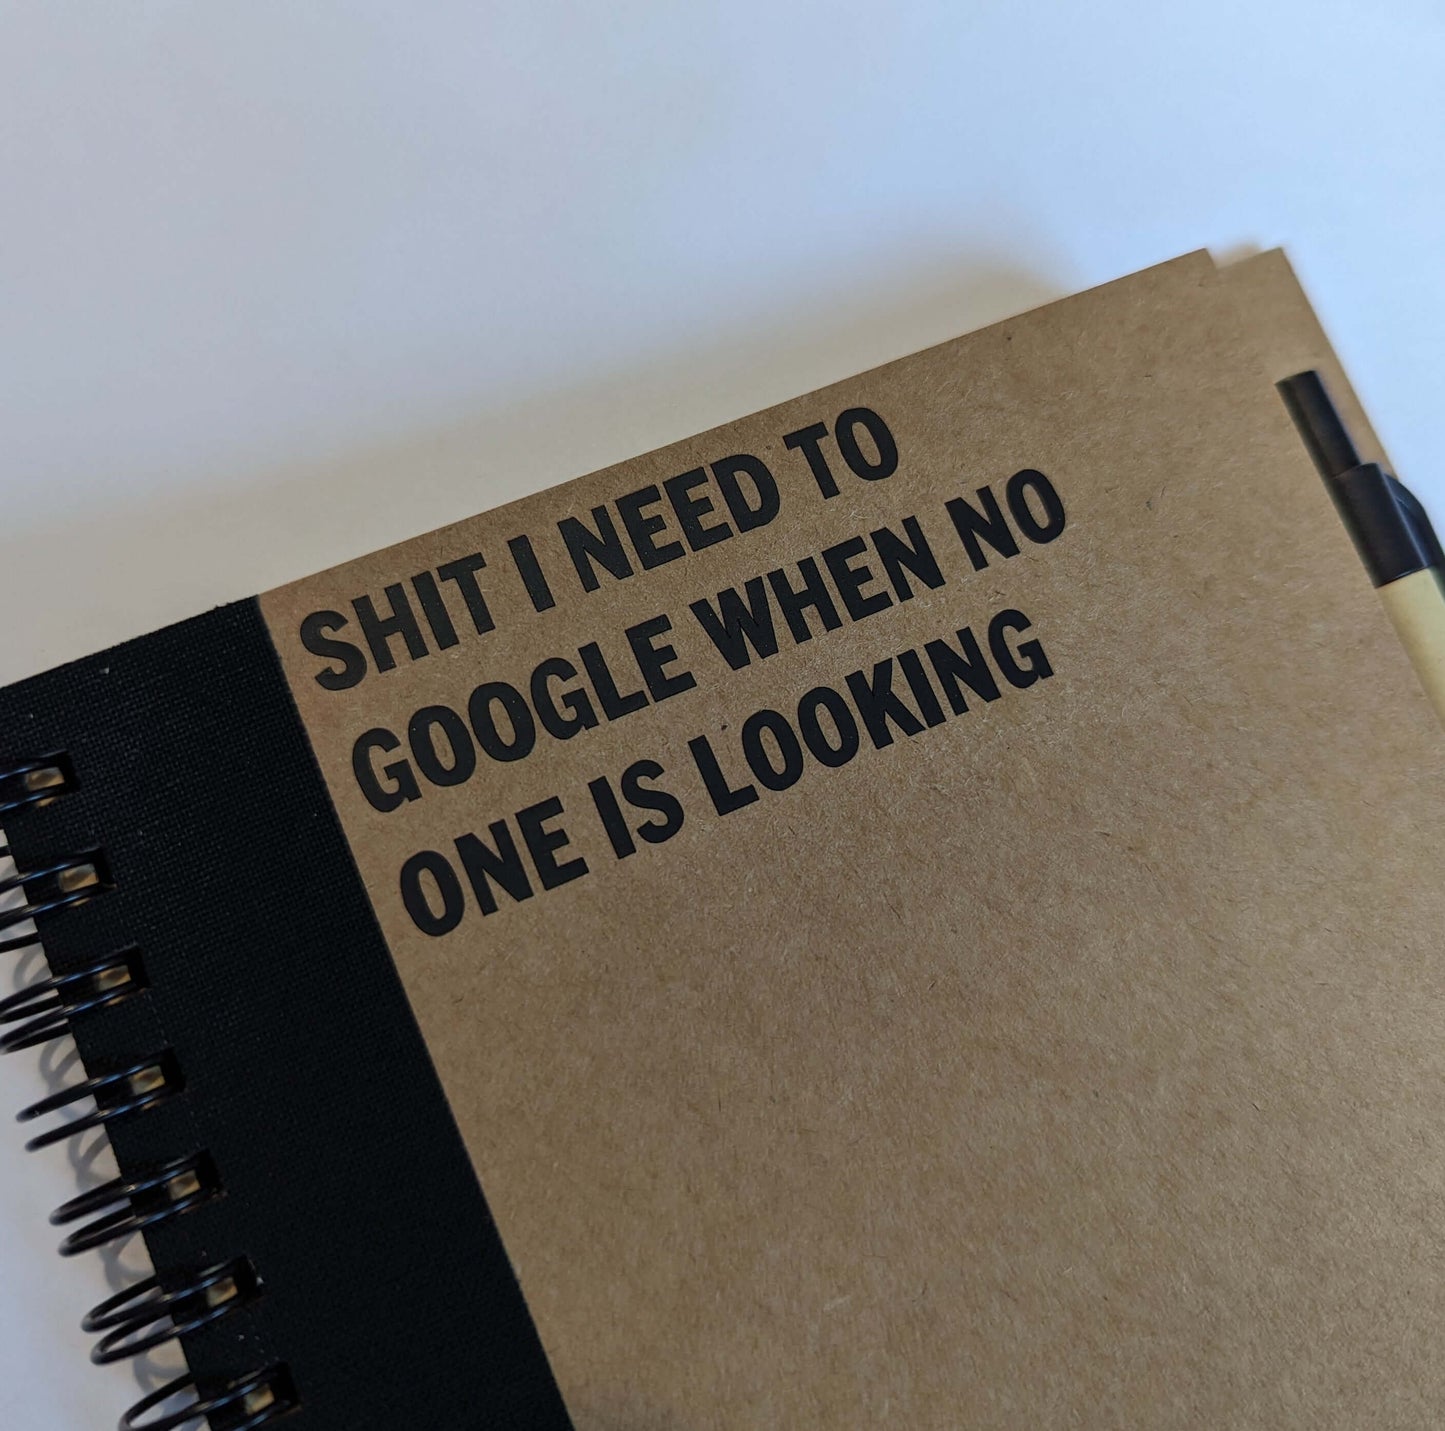 Shit I Need to Google When No One is Looking Notebook